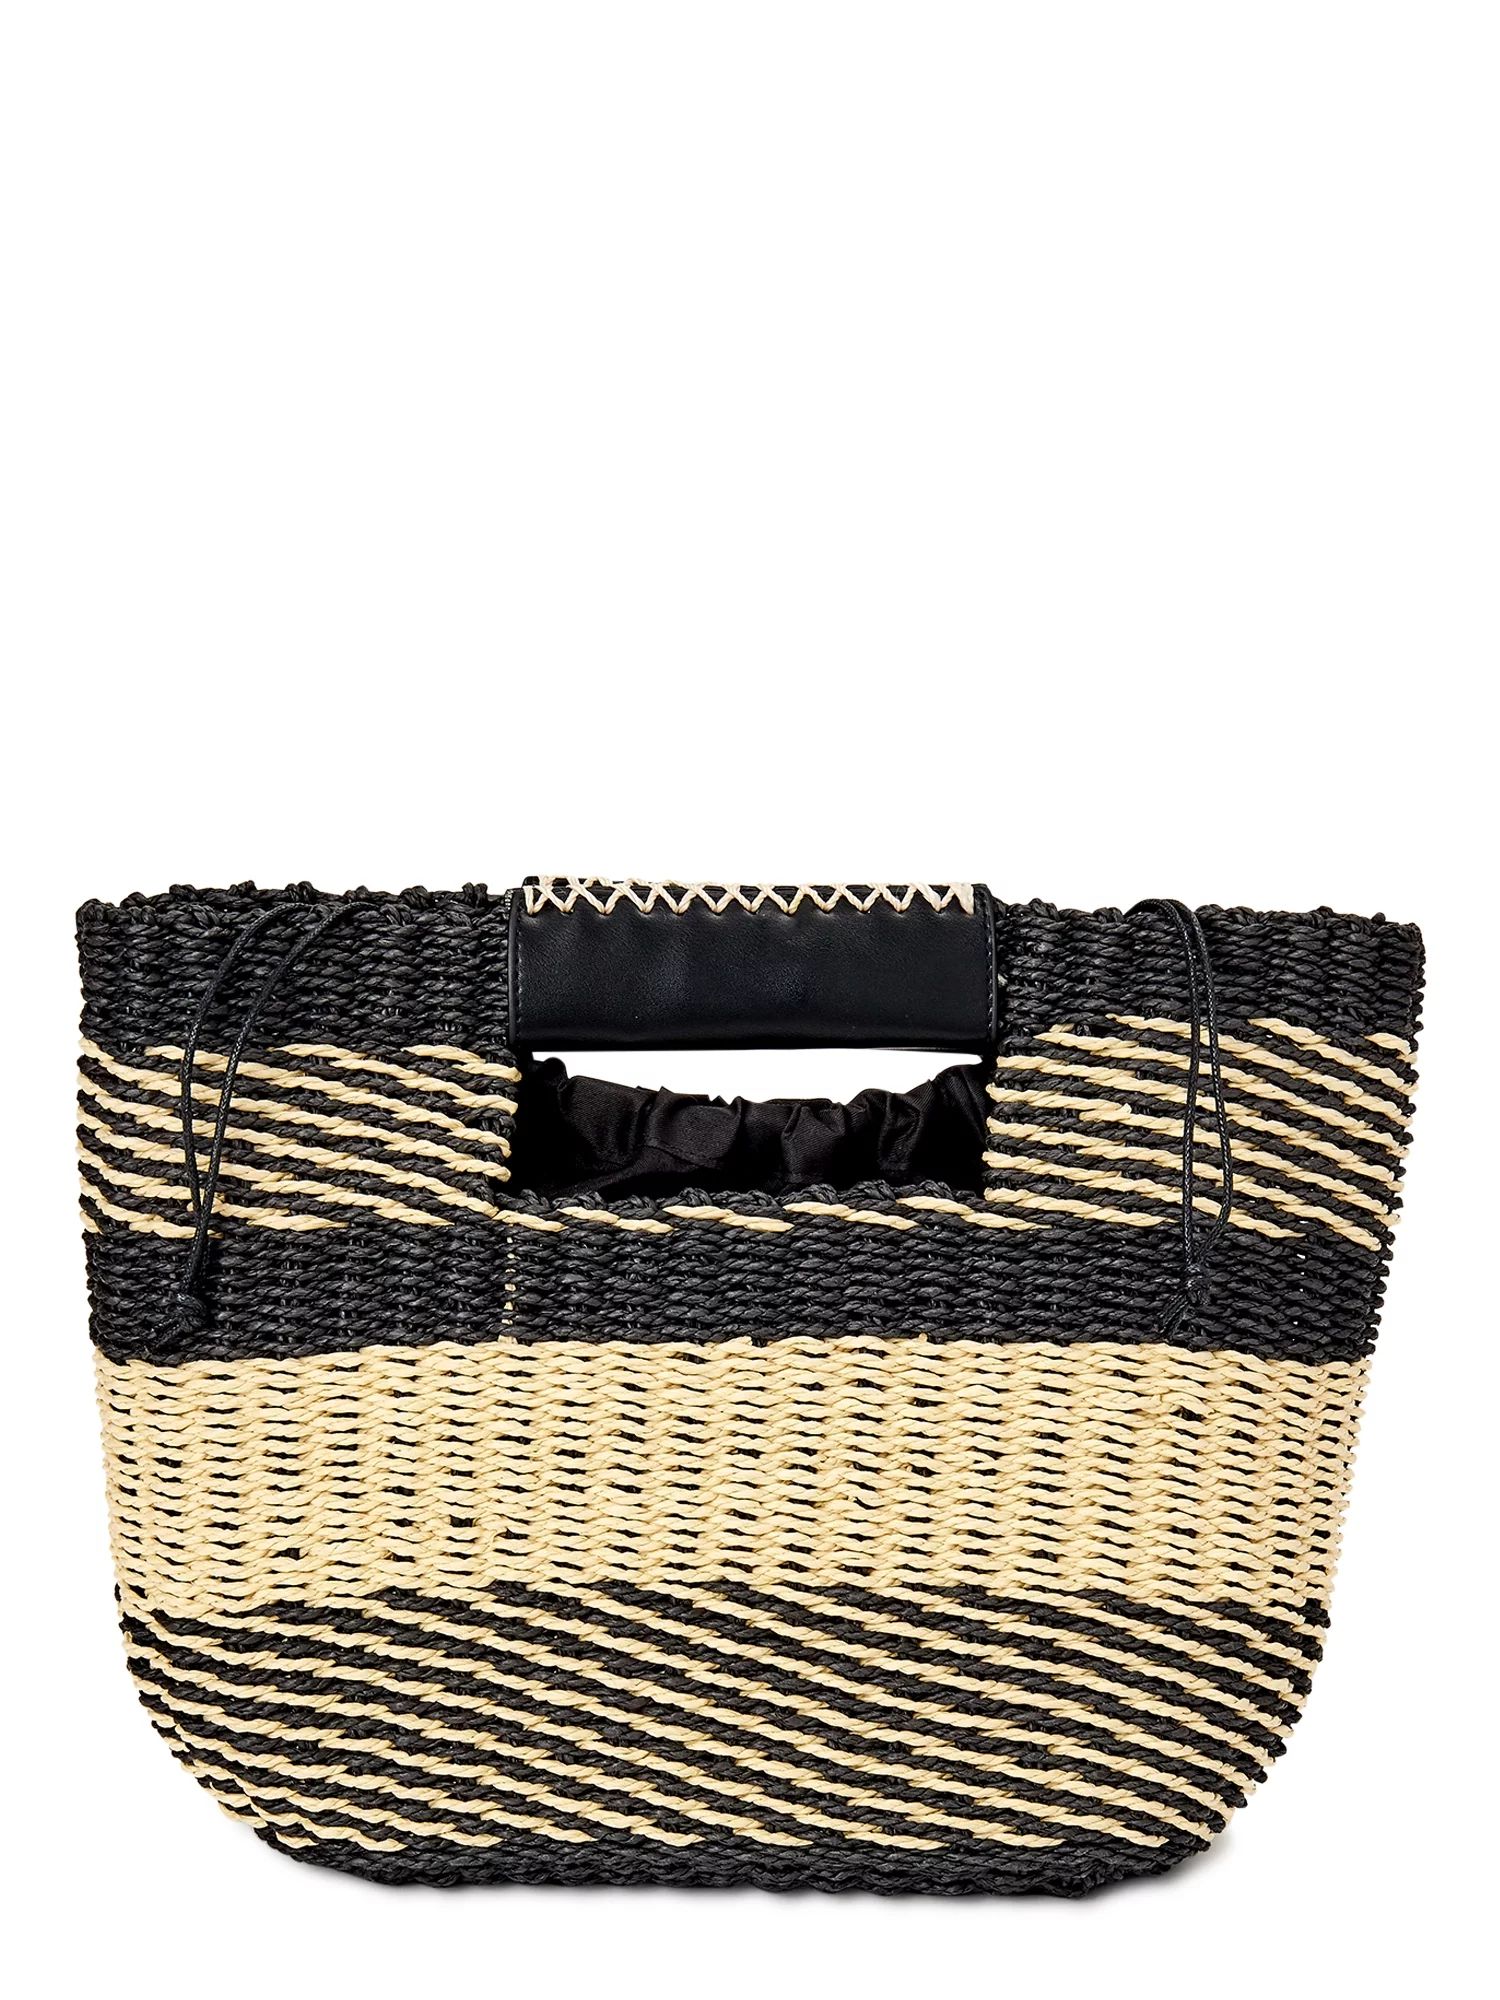 Scoop Women’s Striped Woven Beach Bag with Removeable Pouch Black | Walmart (US)